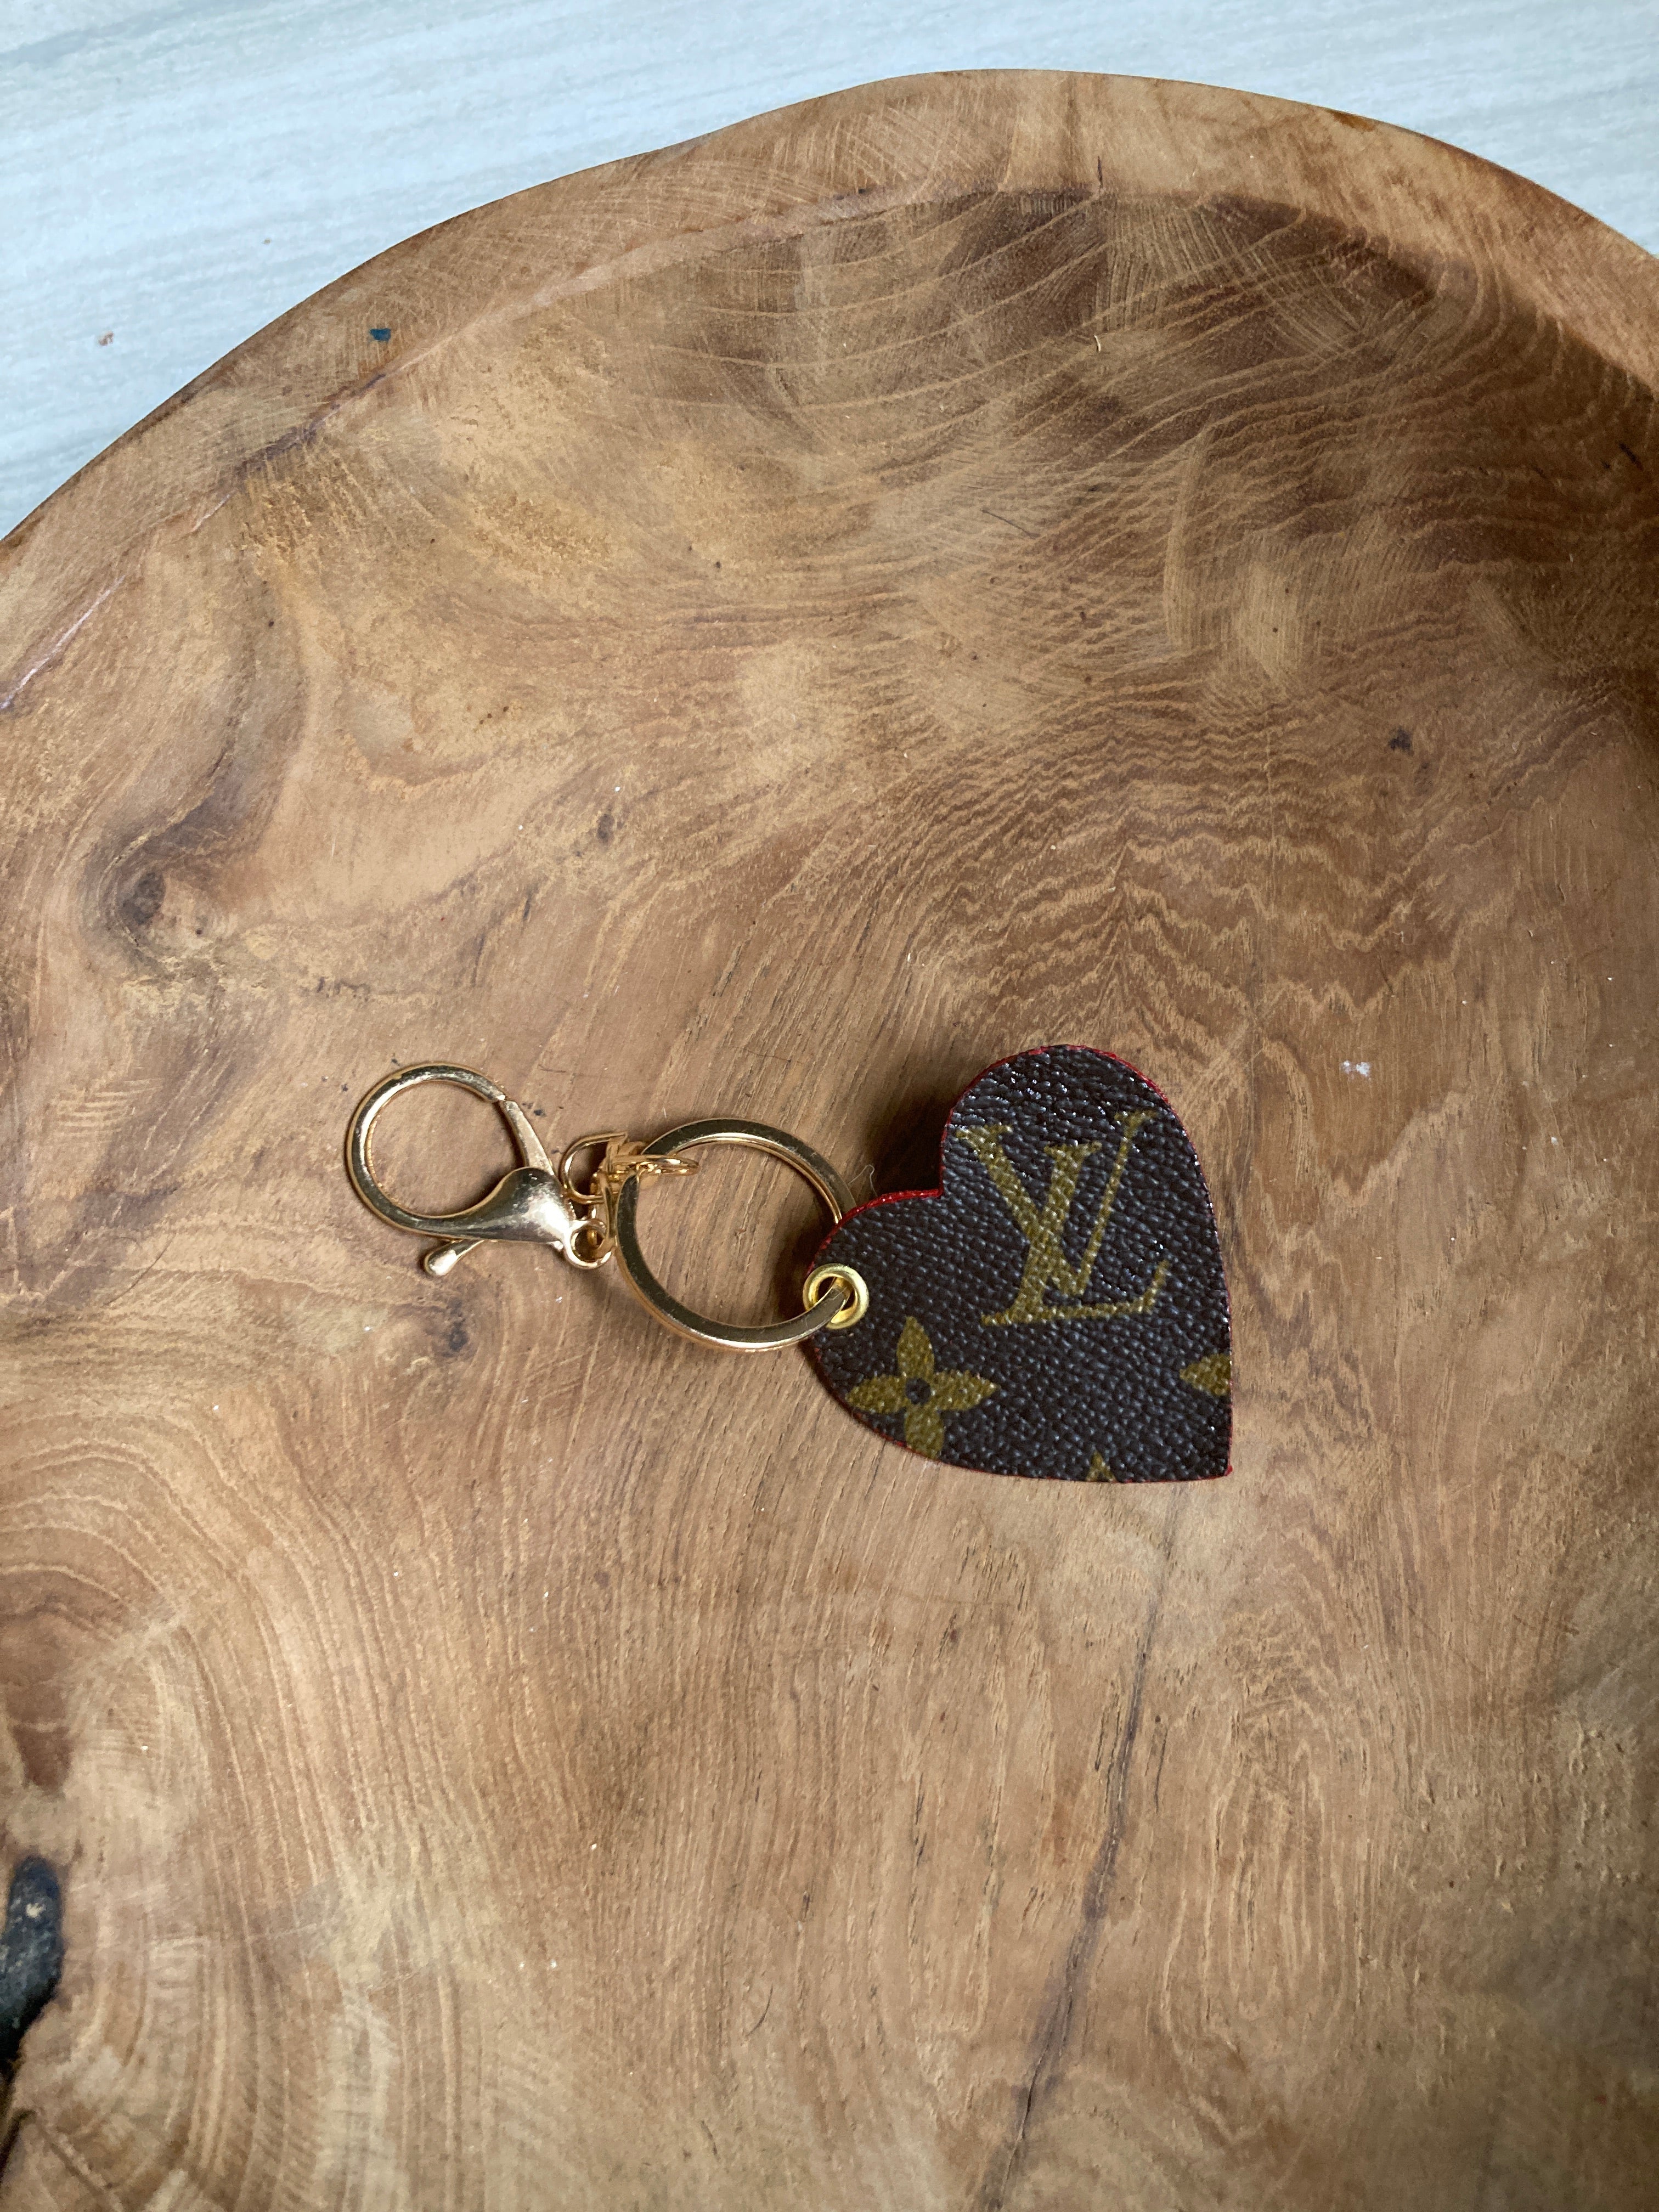 Louis Vuitton Key Ring Holder Charm Malletier Vintage used from JAPAN